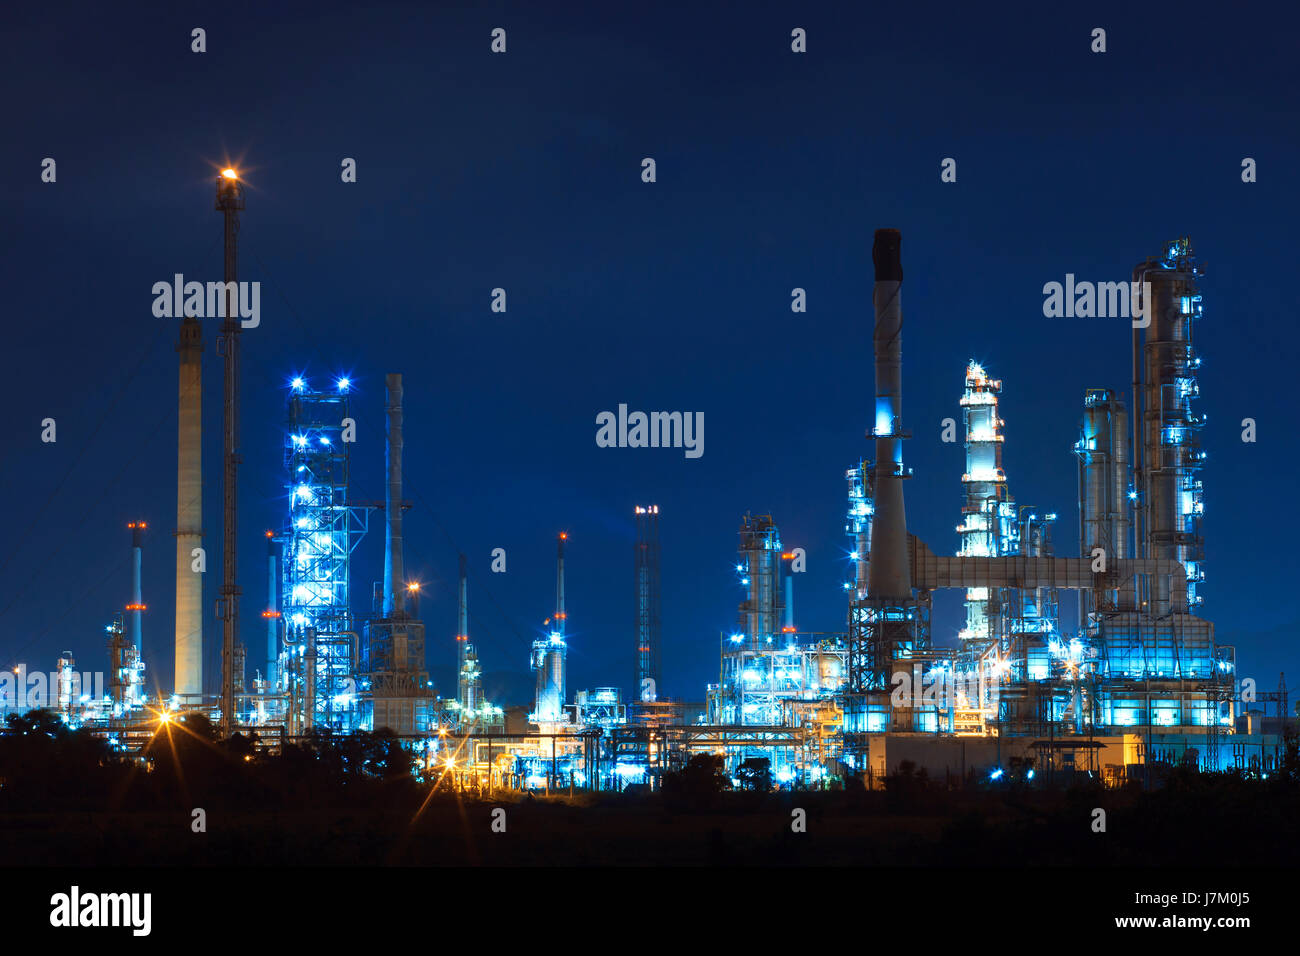 lighing landscape of oil refinery petrochemical in heavy industry estate use for power and energy topic Stock Photo